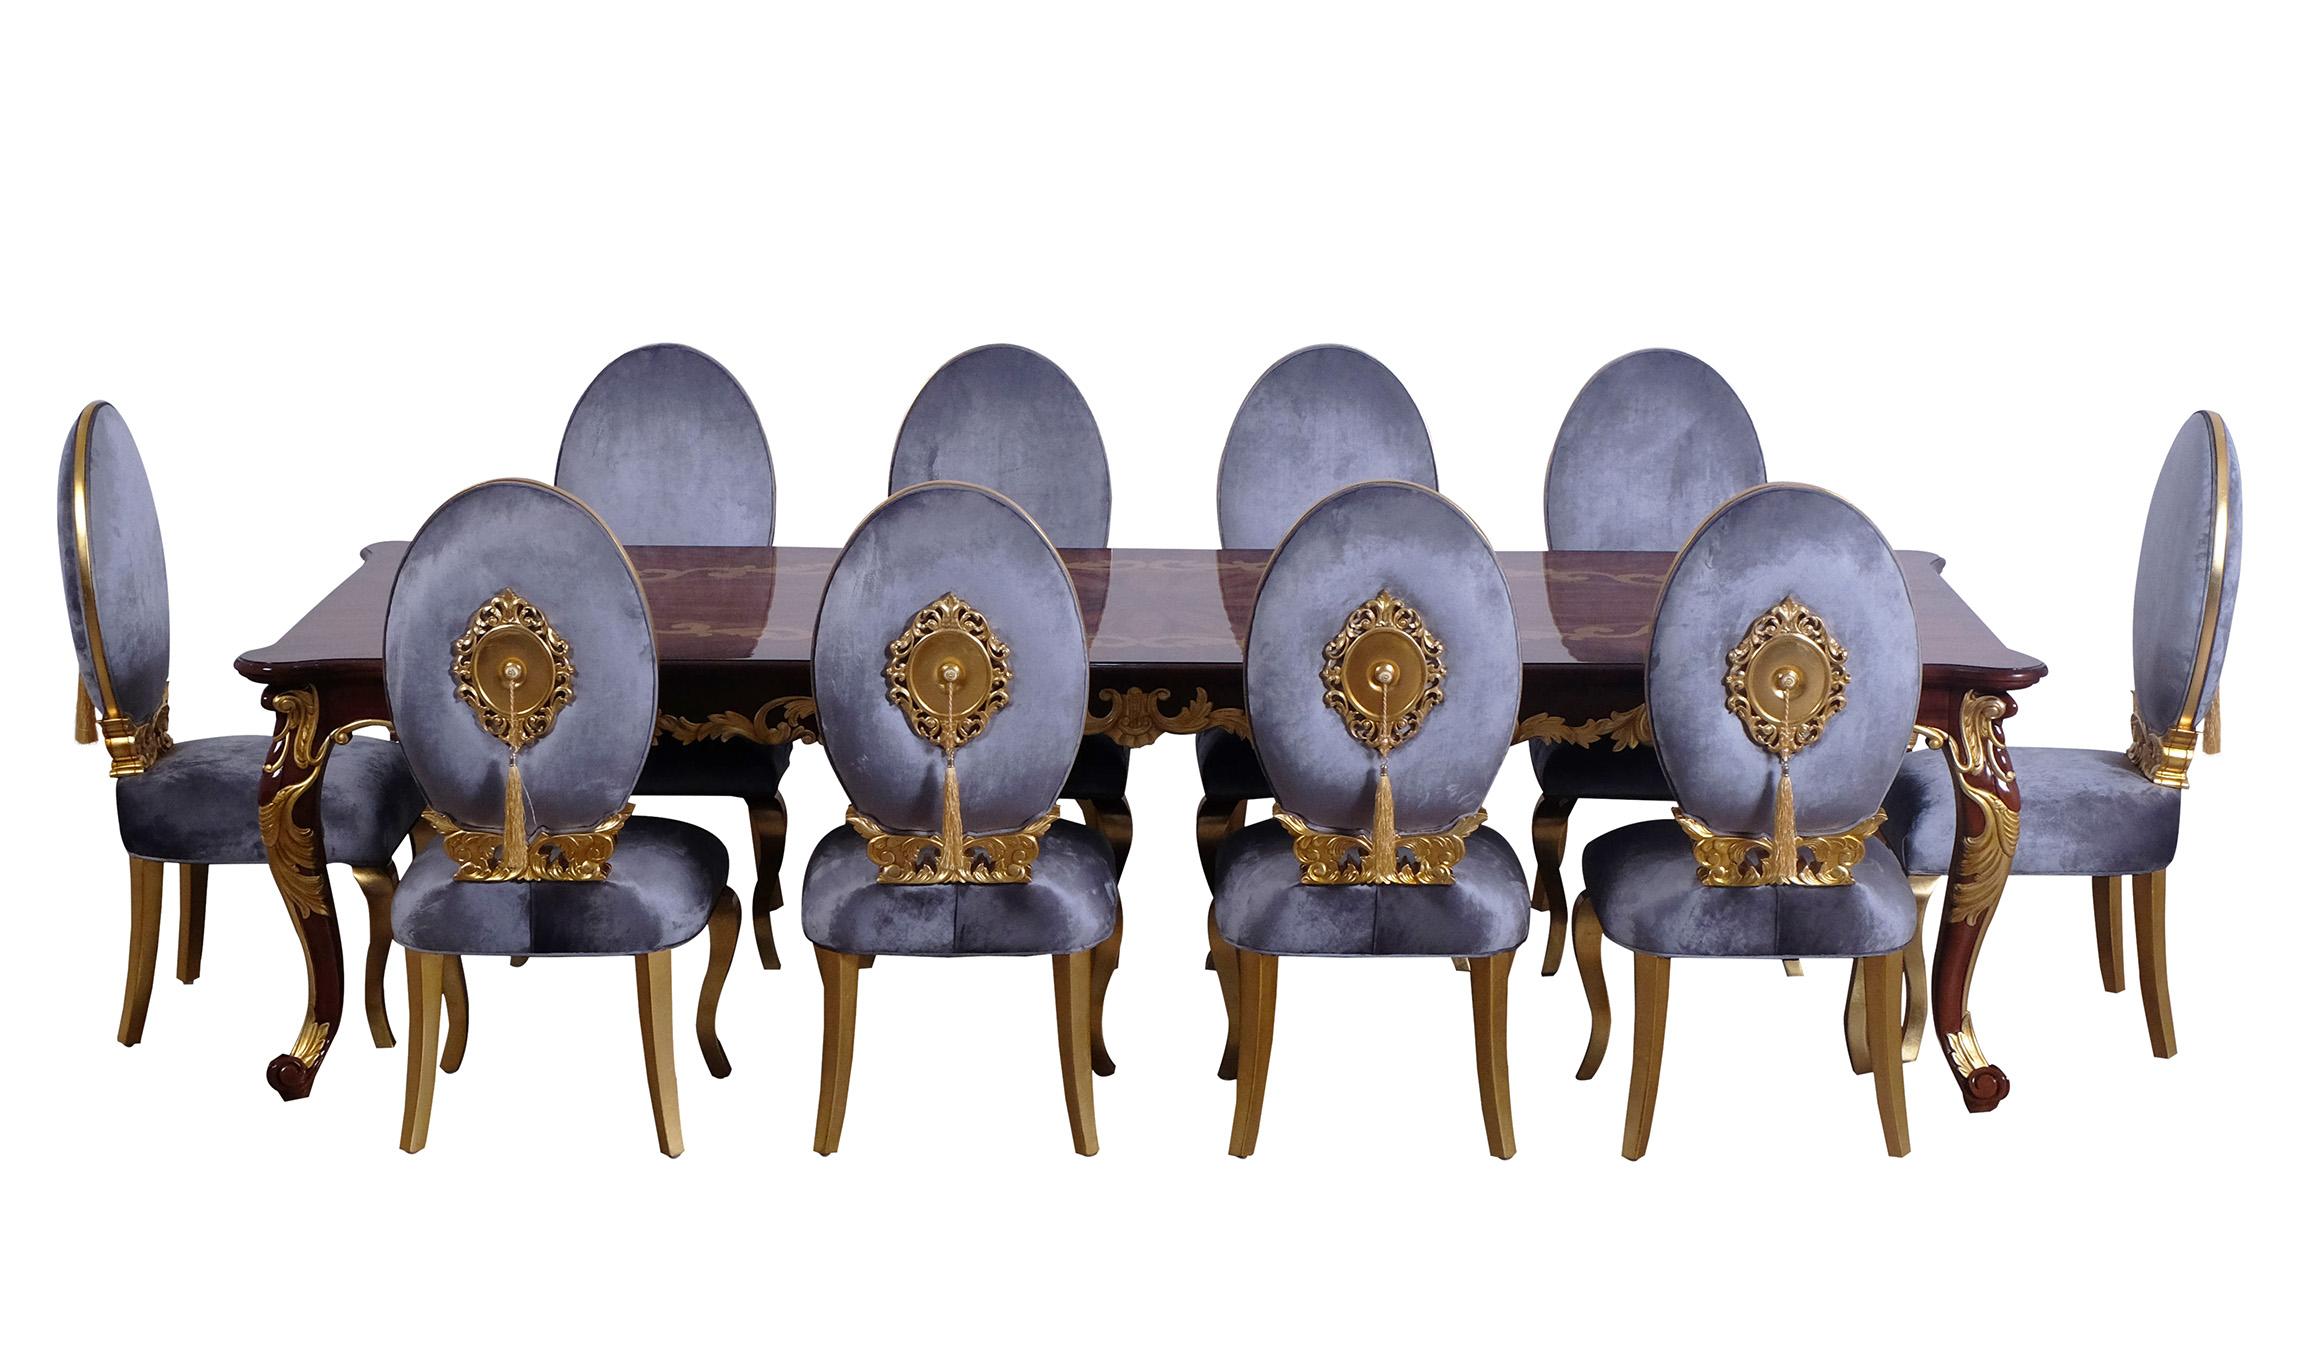 Classic, Traditional Dining Table Set LUXOR 68582-DT-11-GREY in Charcoal Grey, Gold, Brown Fabric